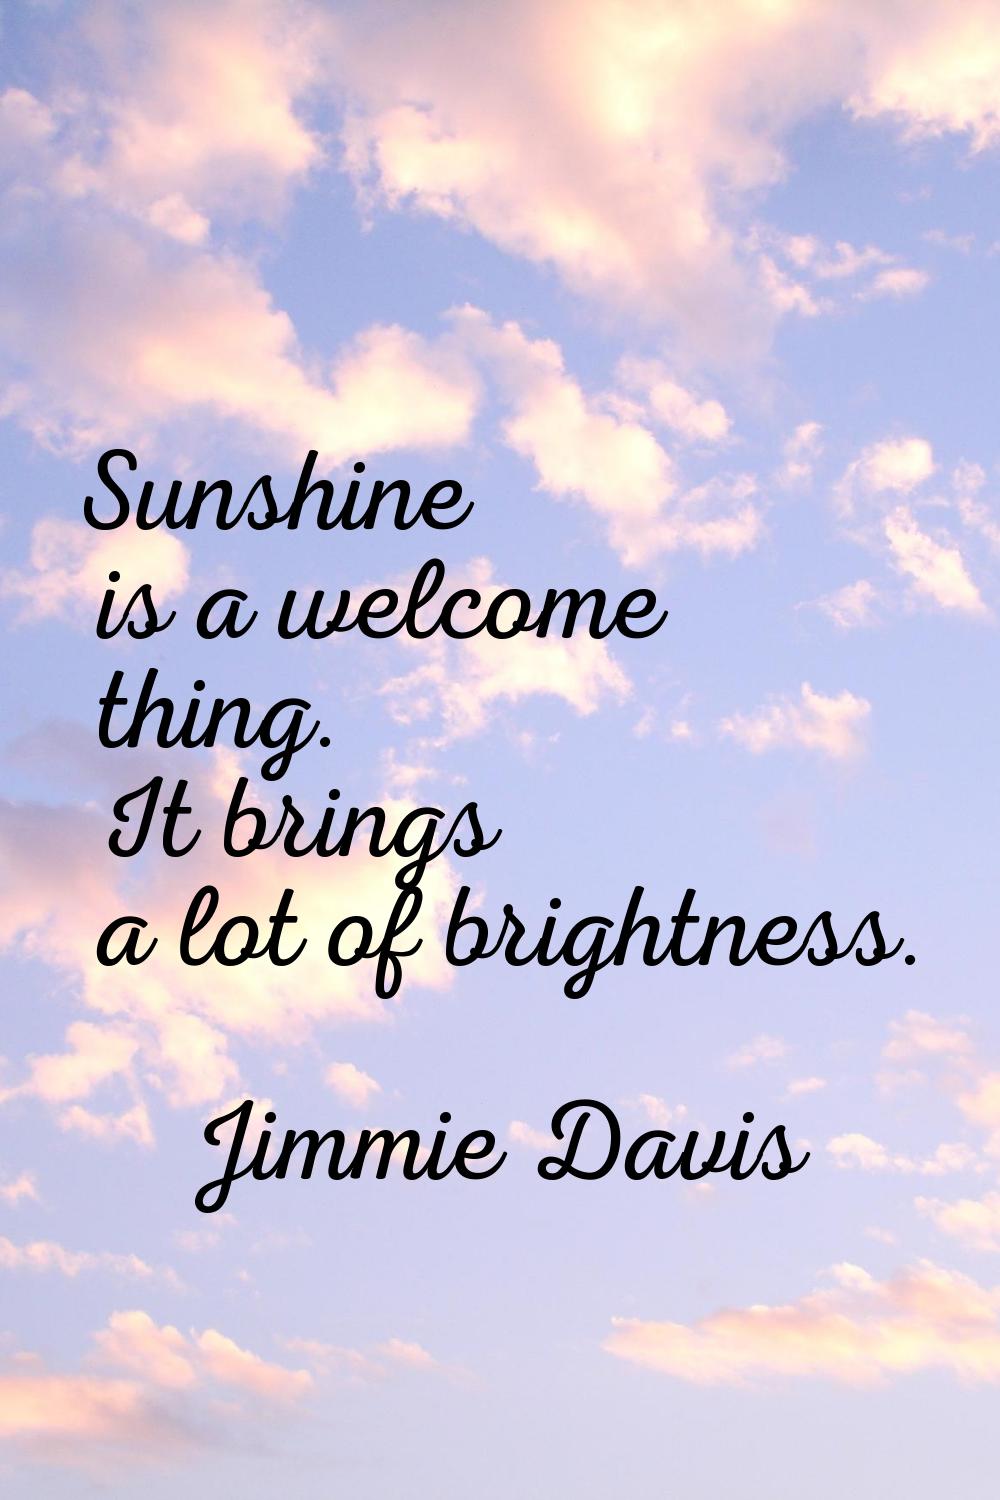 Sunshine is a welcome thing. It brings a lot of brightness.